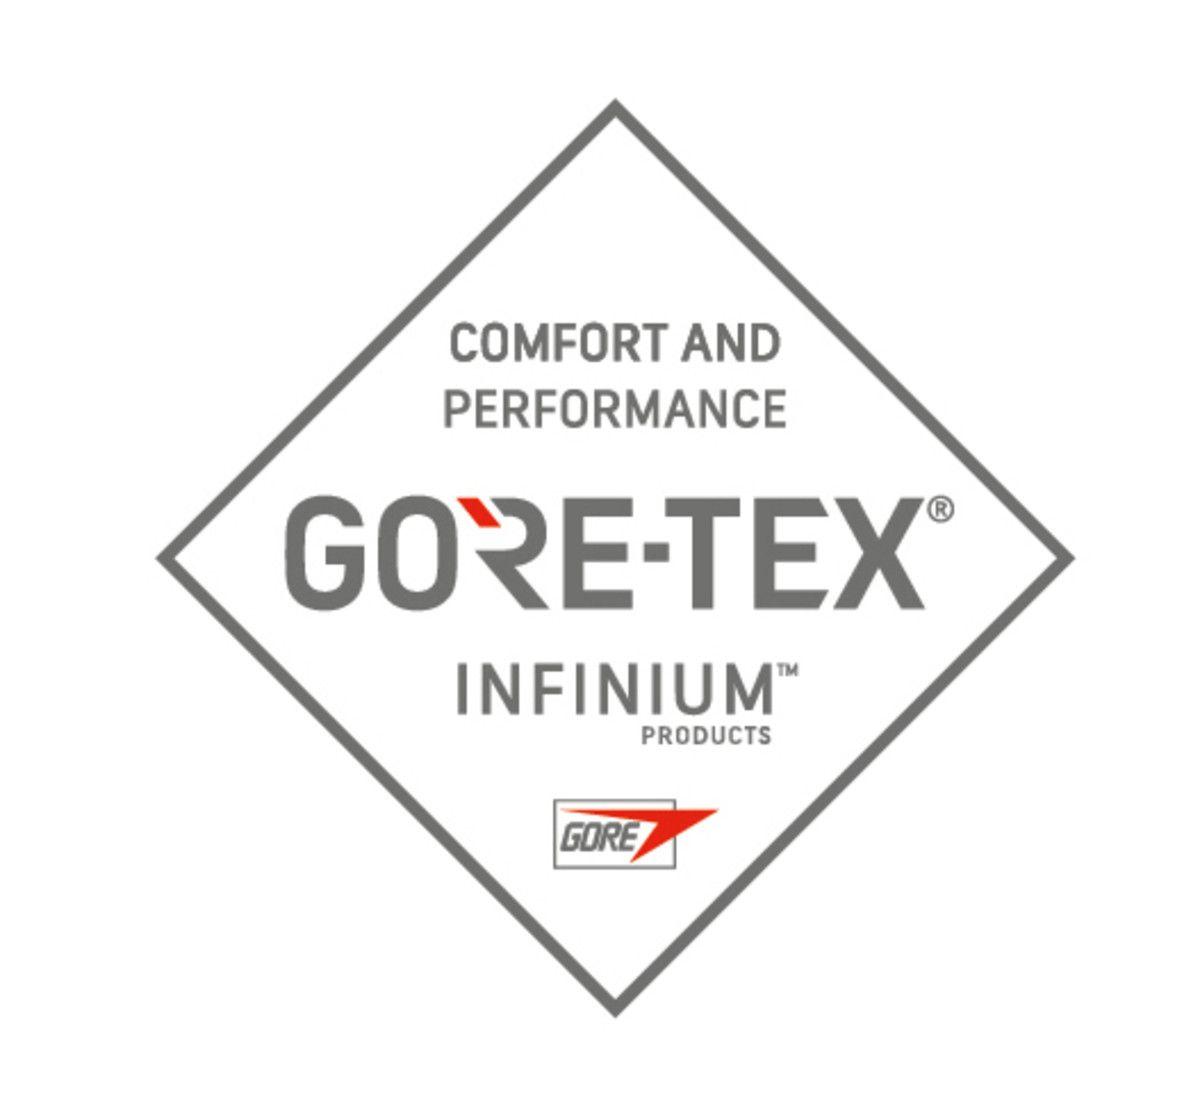 Gortex Logo - W. L. Gore announces brand extension and four new fabric